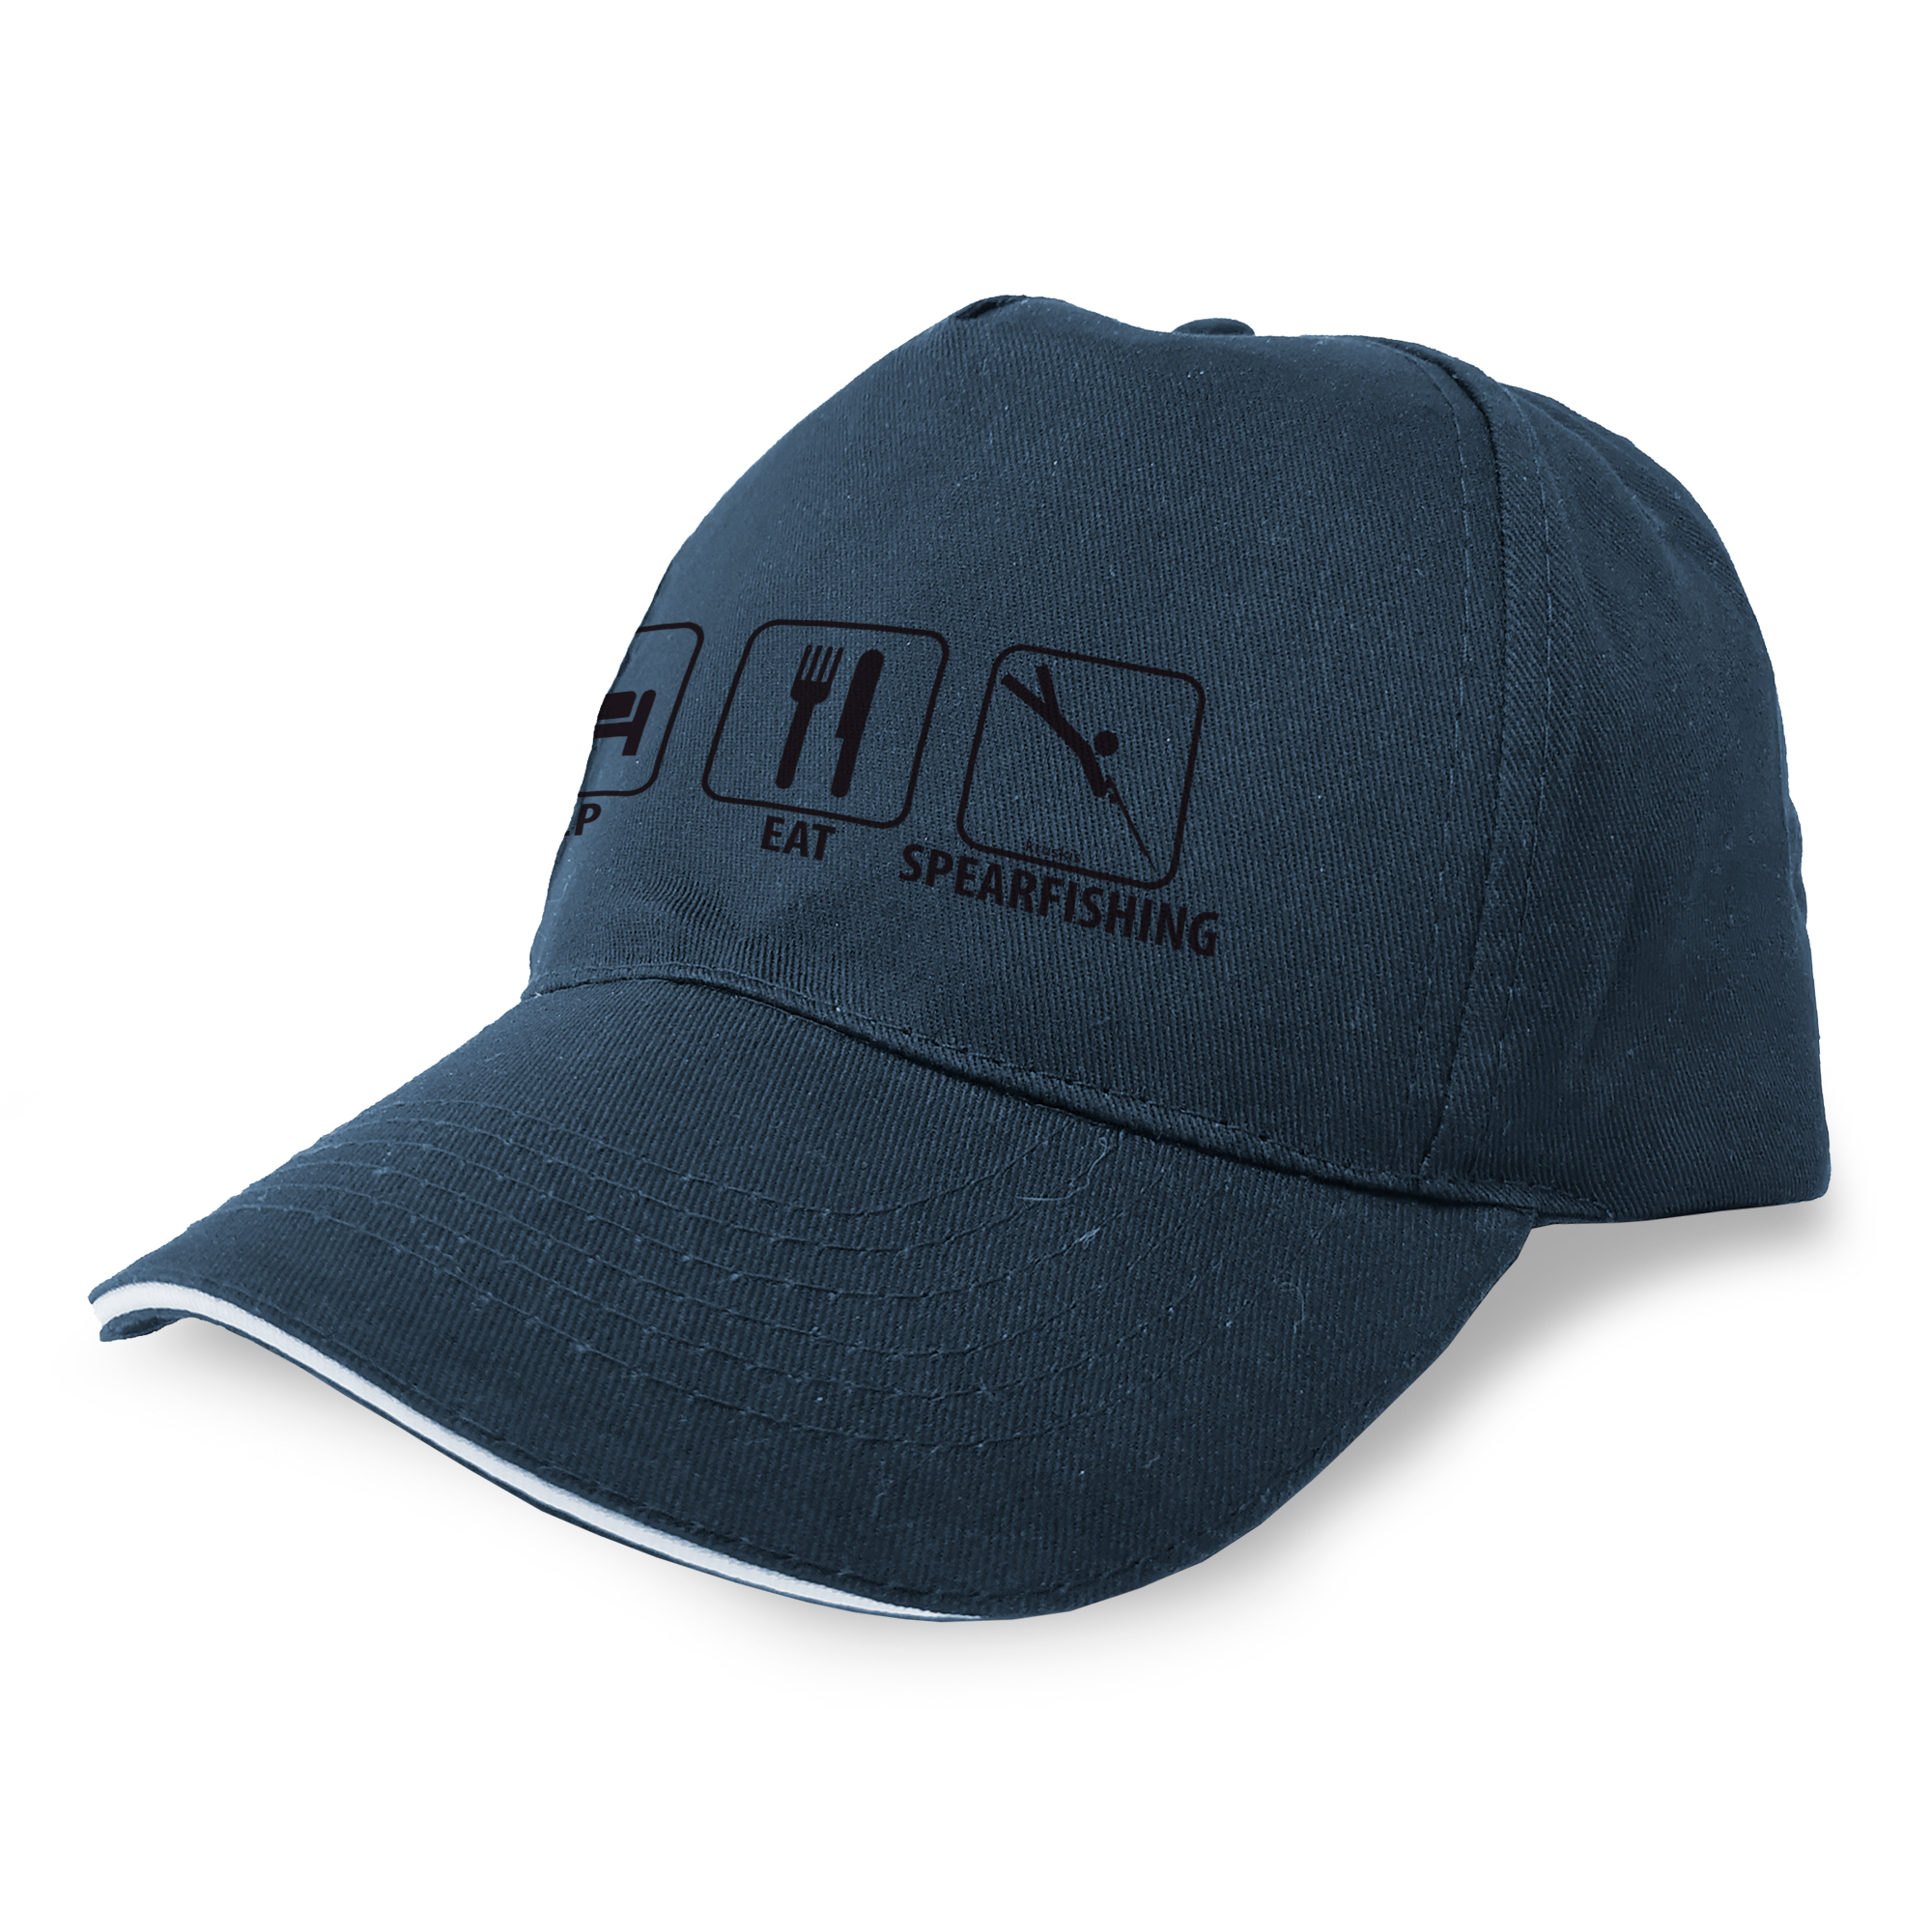 Casquette Chasse sous marine Sleep eat and Sperfishing Unisex